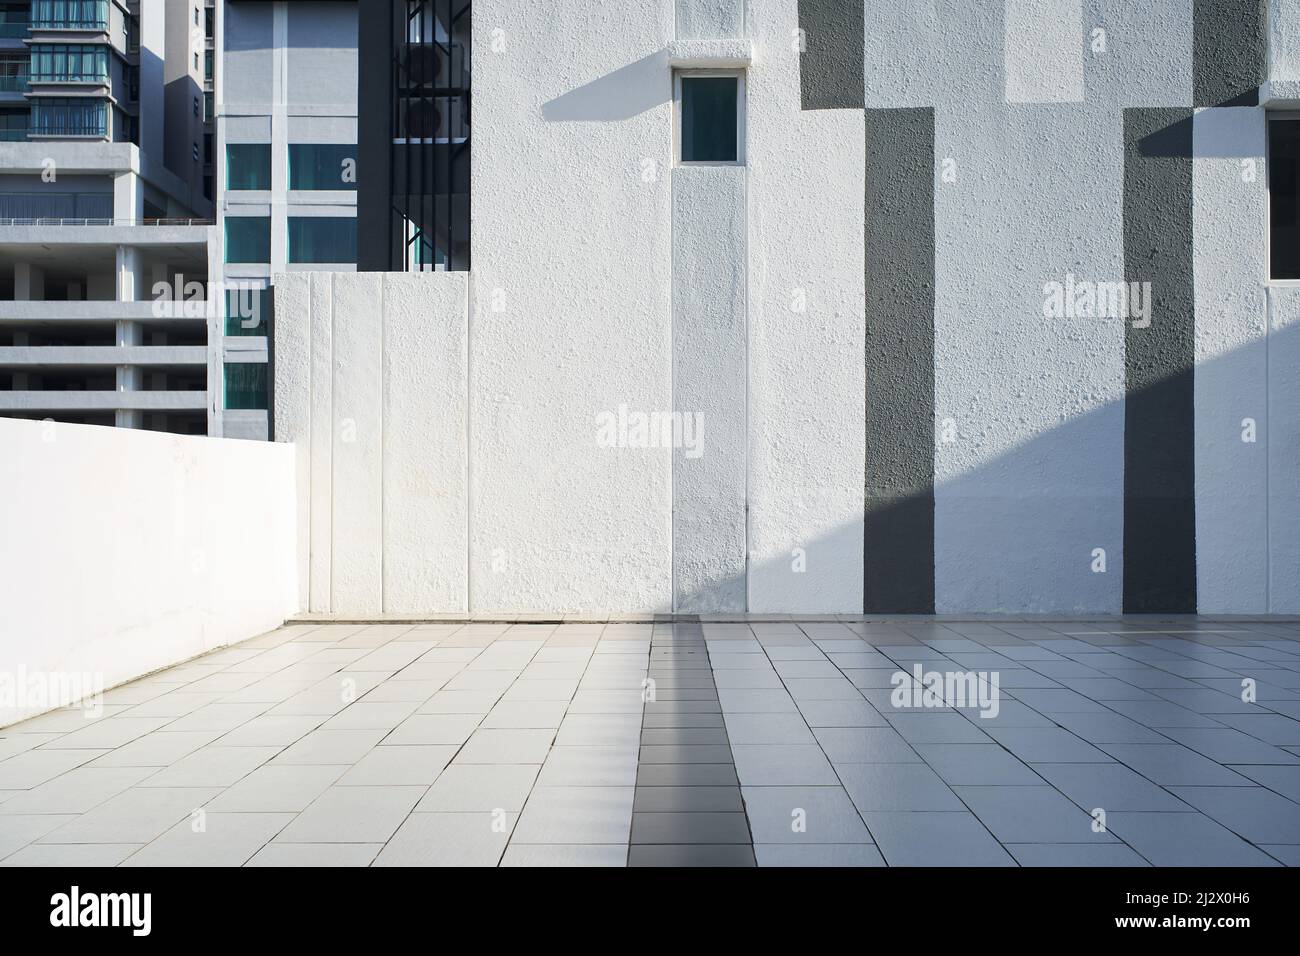 Empty floor with wall in white, grey and black stripes design Stock Photo